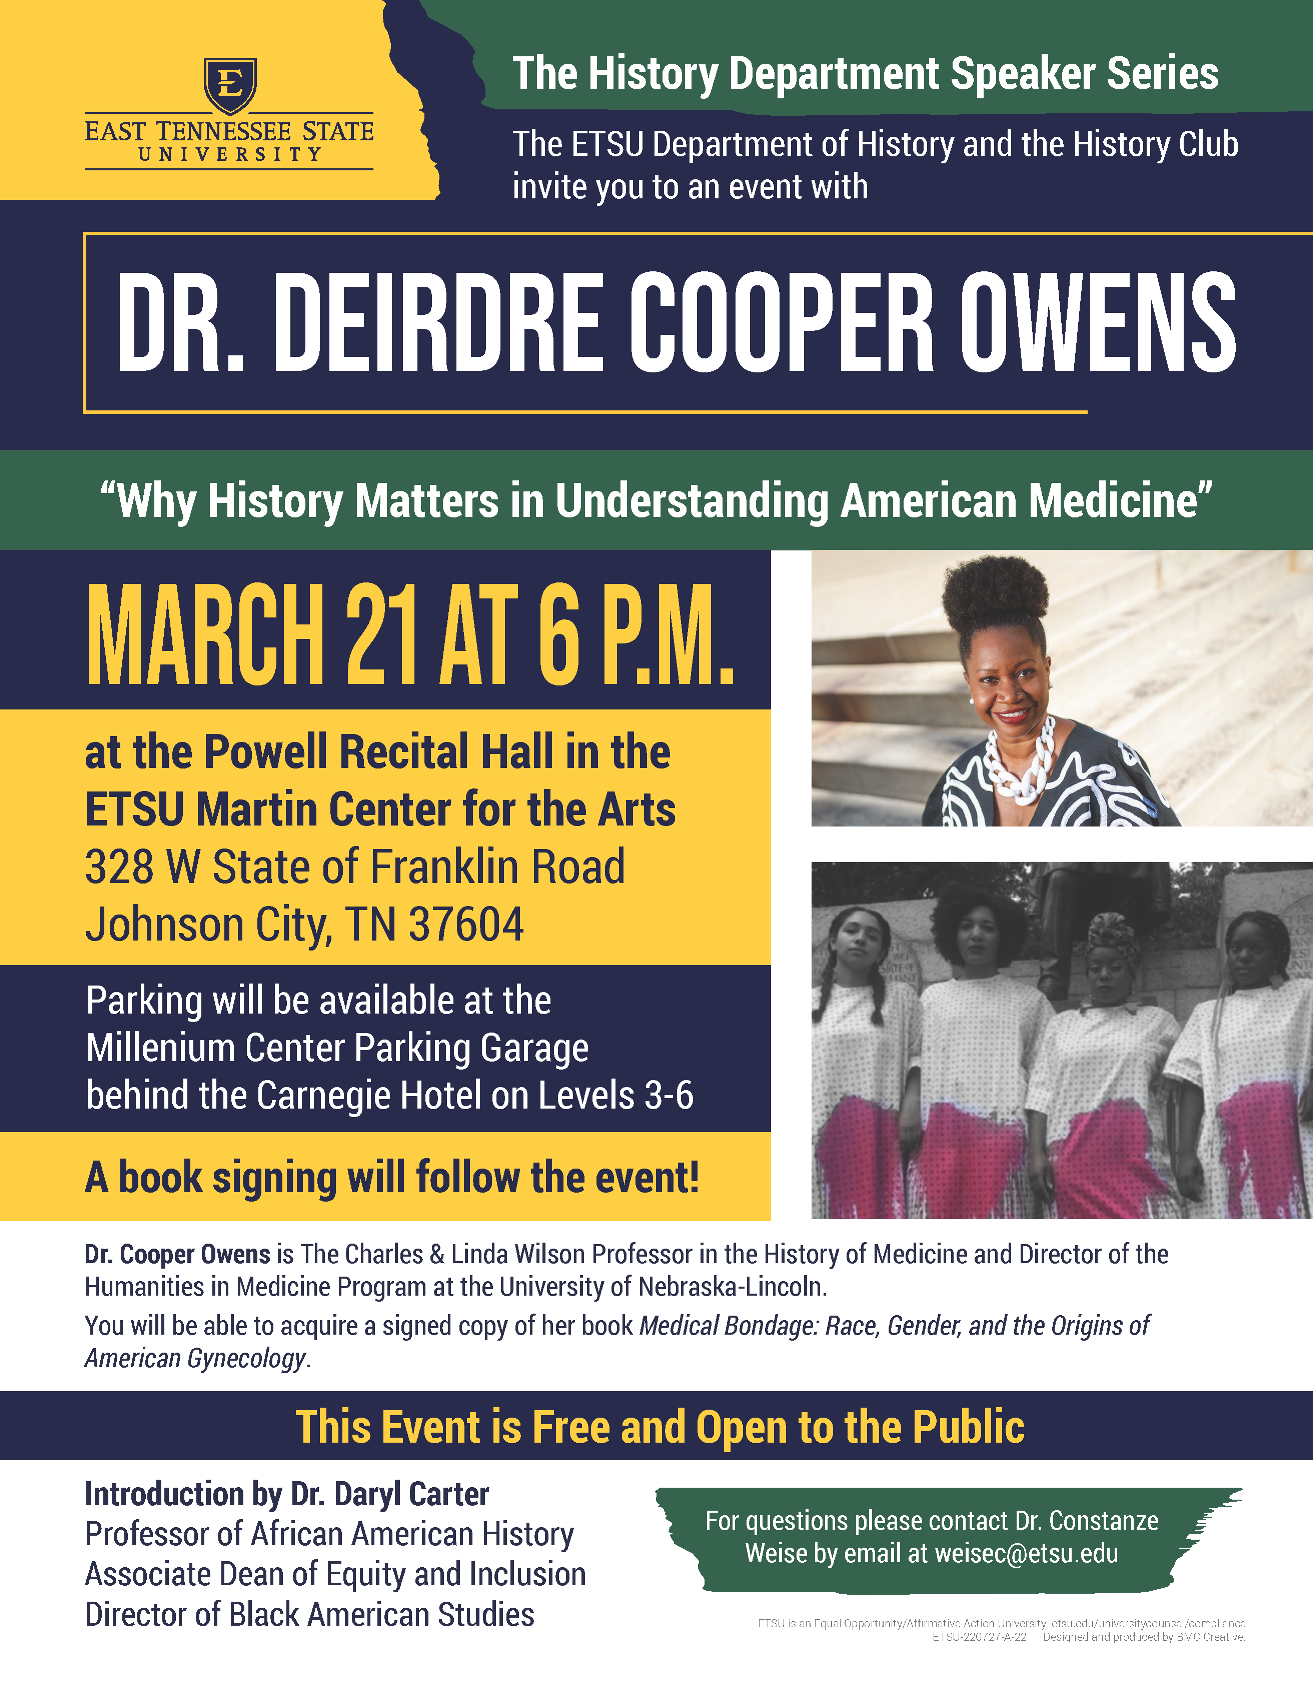 Dr. Deidre Cooper Owens Event Flyer with details in the comments above.